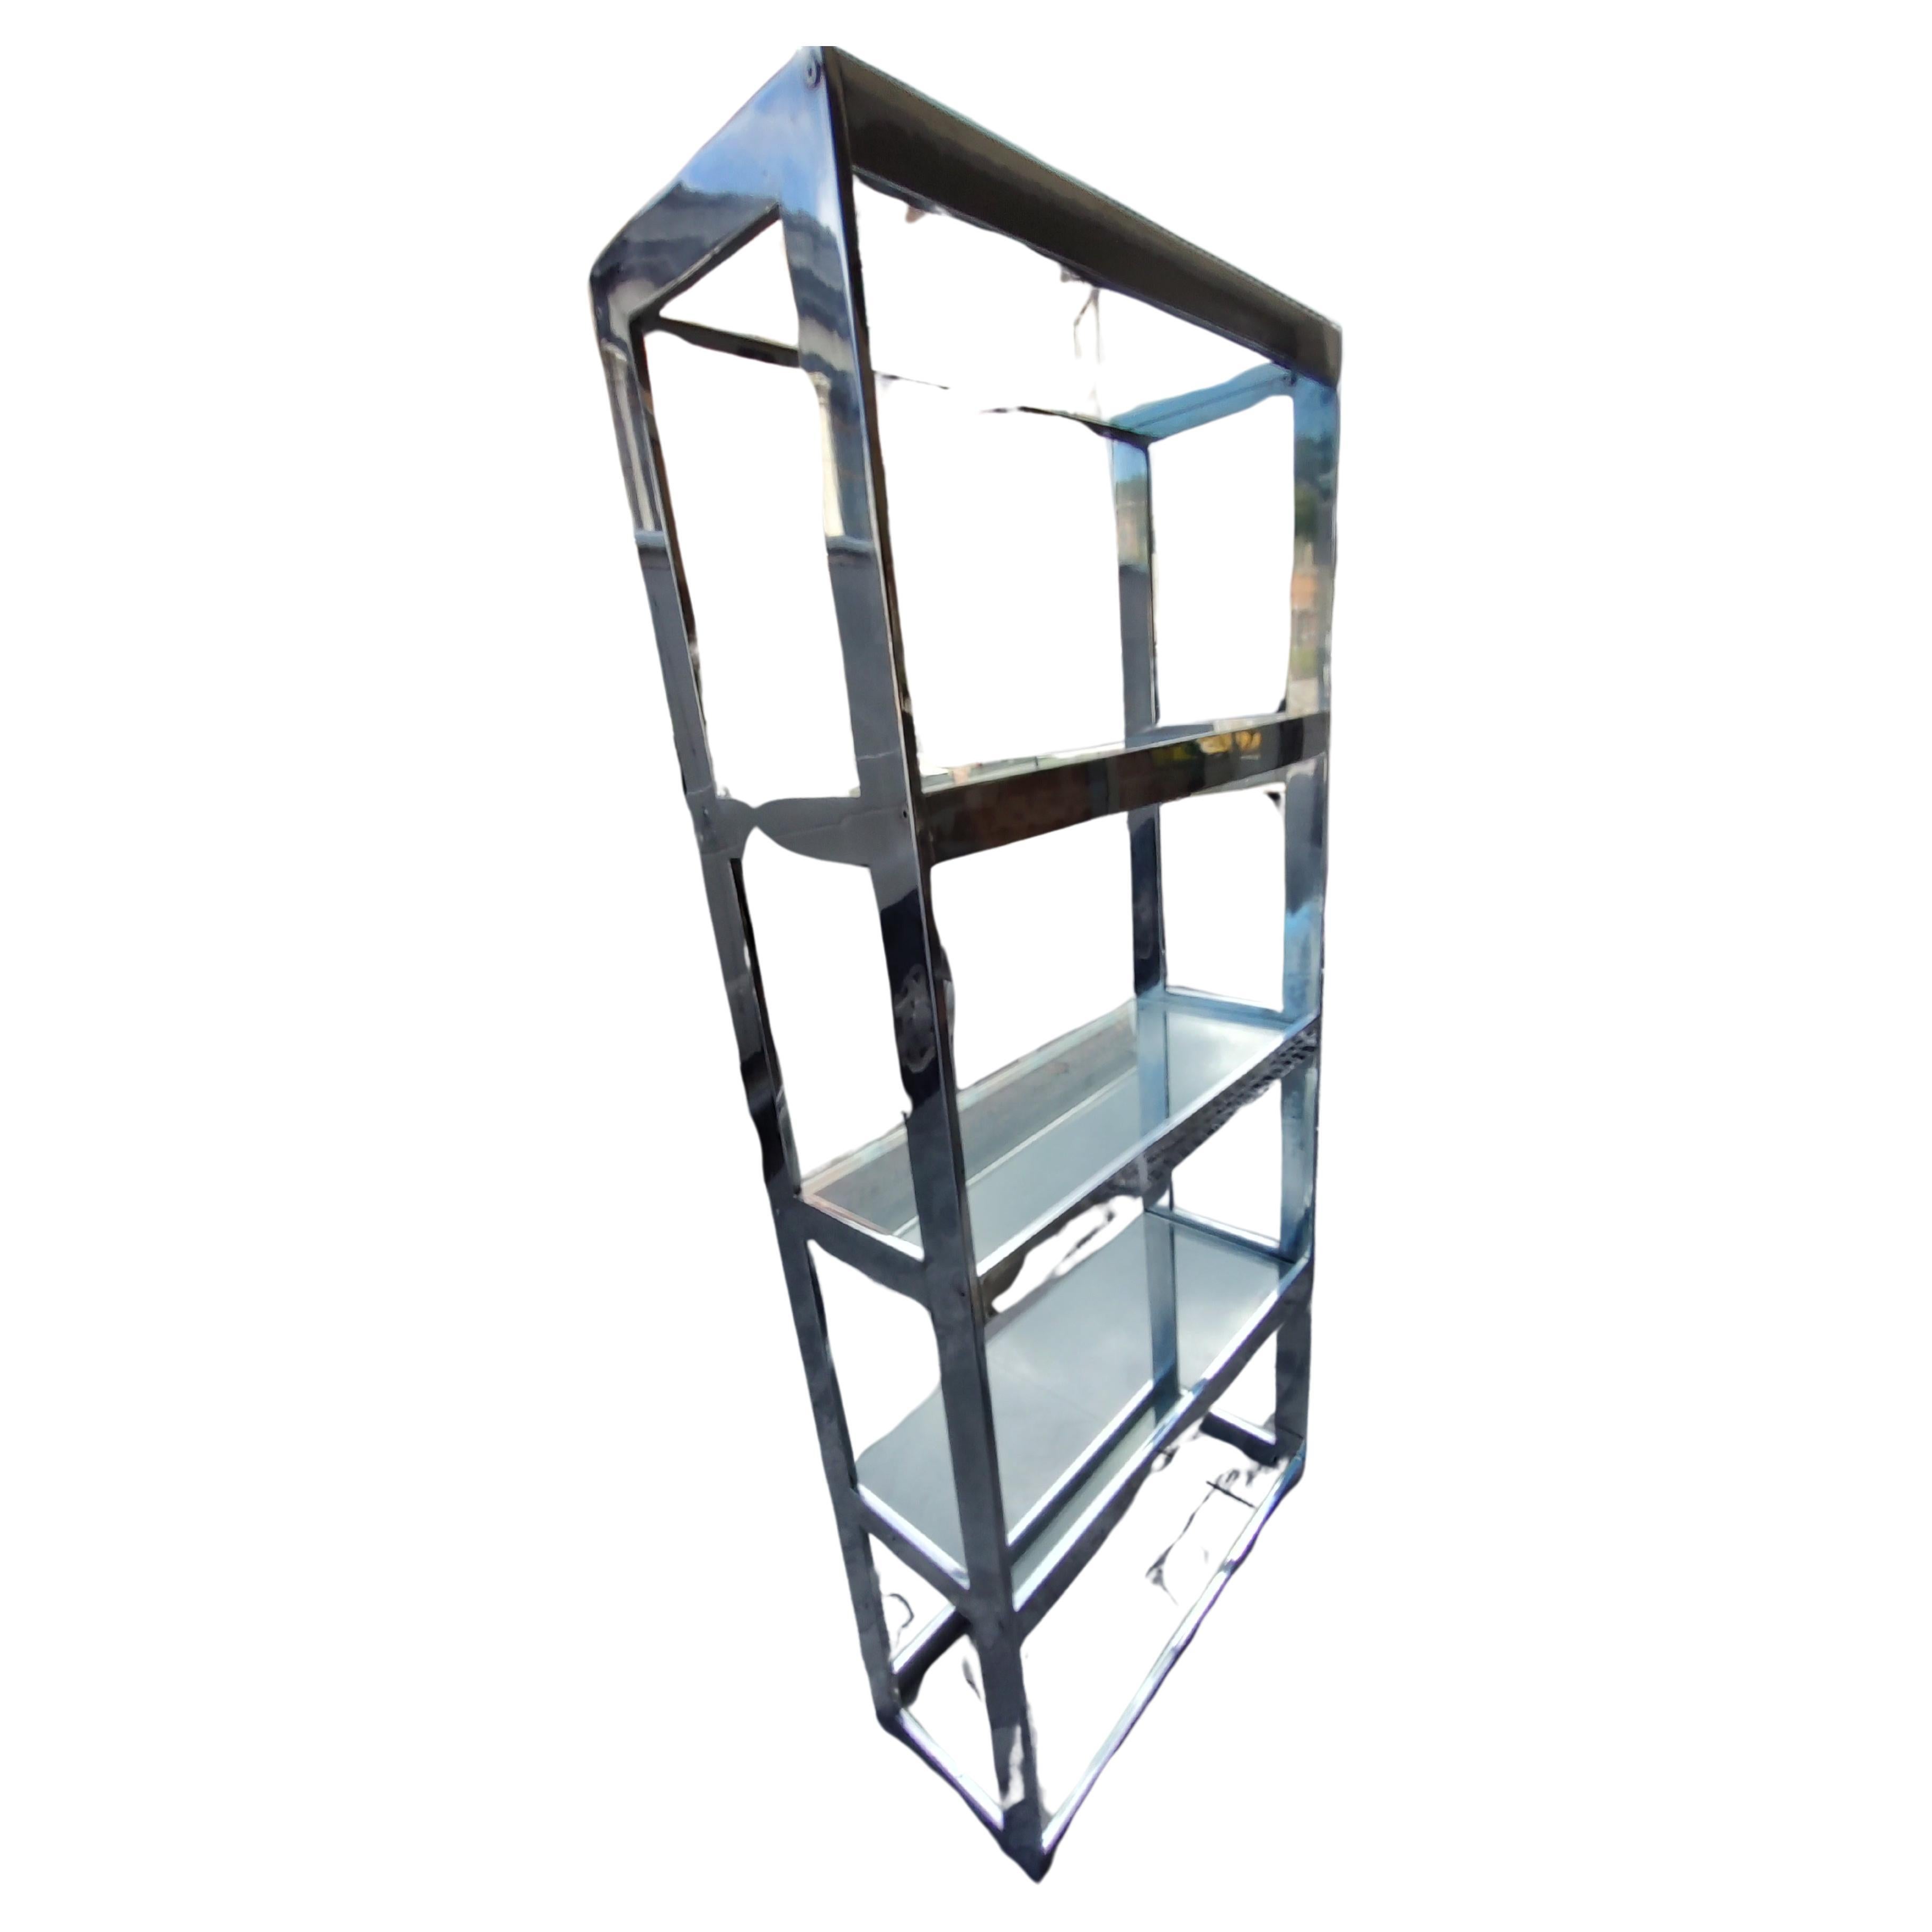 Pair of Mid-Century Modern Brutalist Etageres Shelving Units Flat Chrome & Glass For Sale